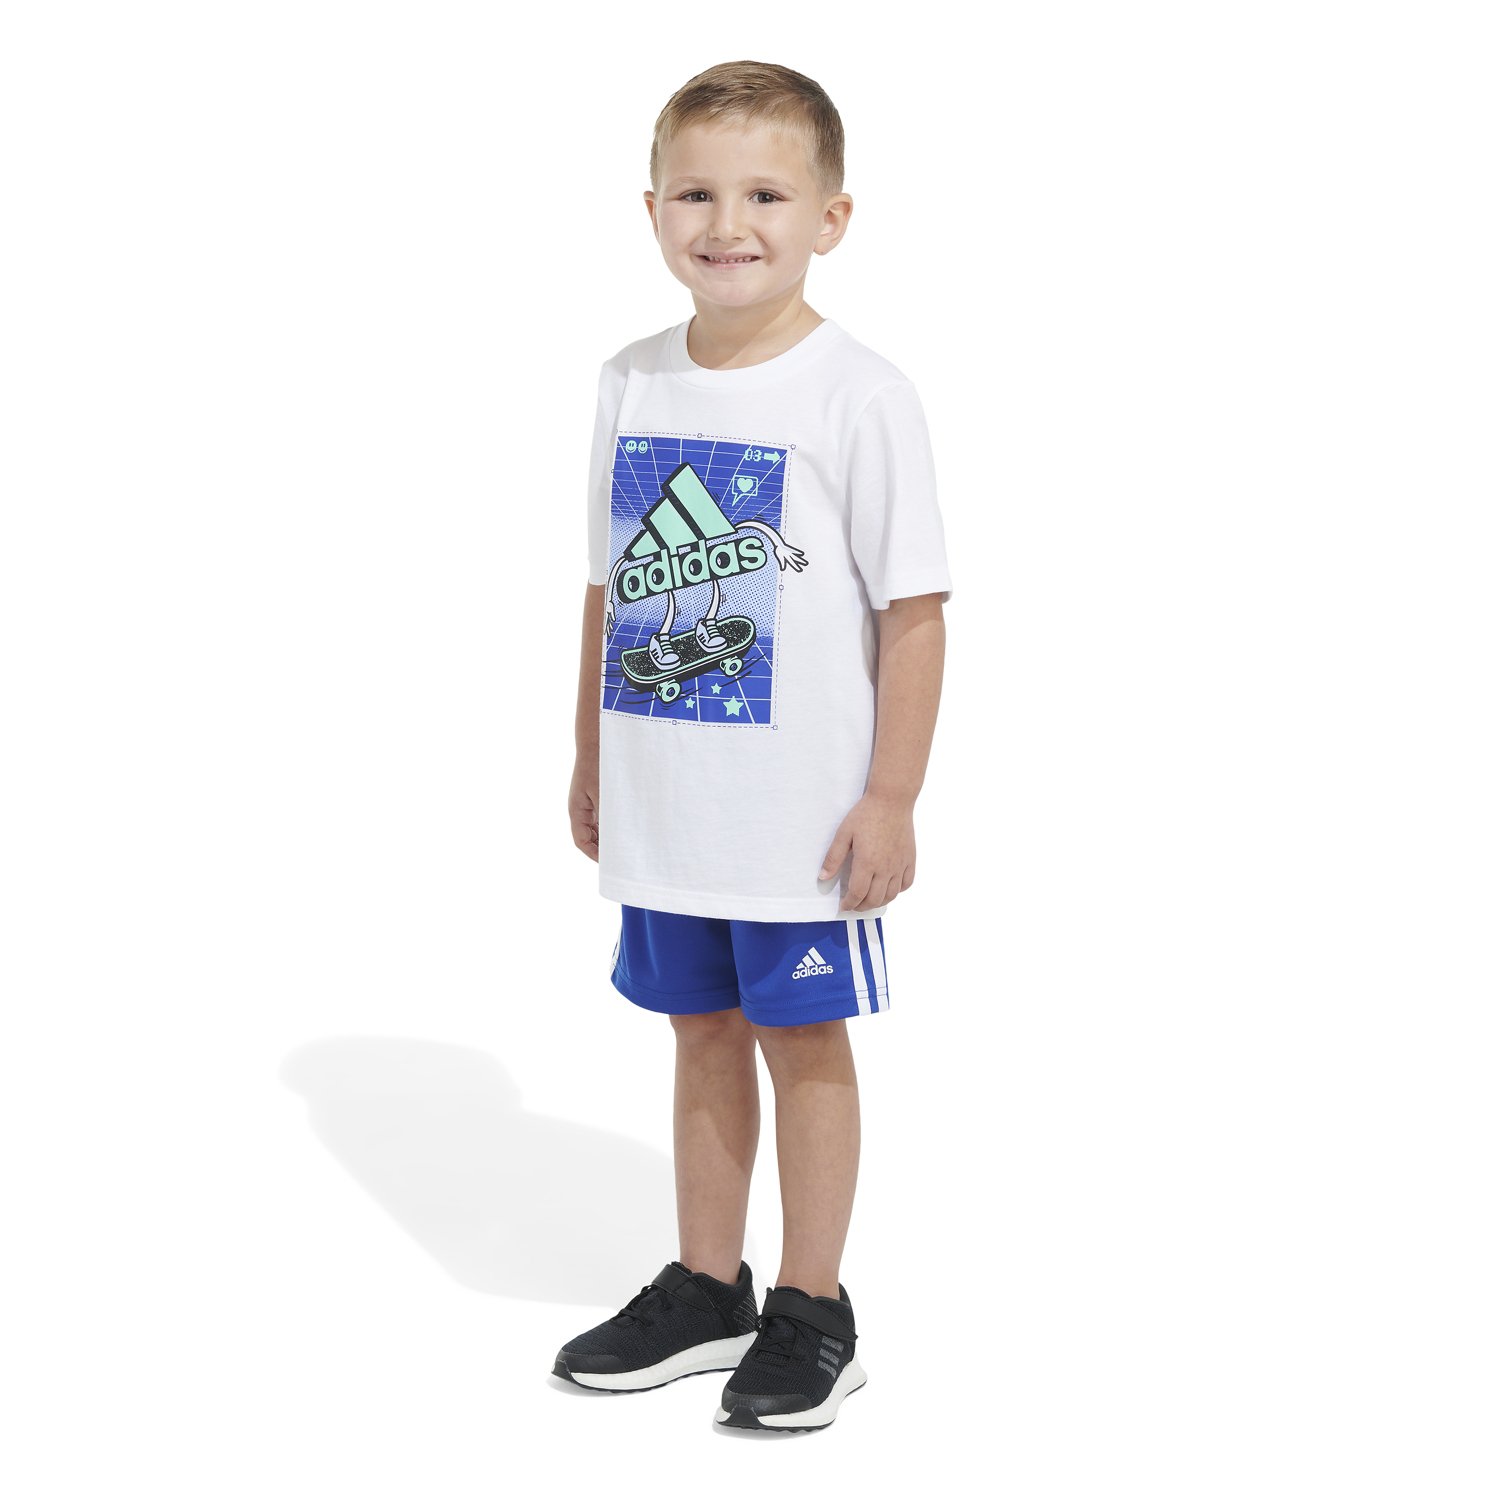 Academy Shorts 2-Piece | T-shirt Graphic and Cotton Set adidas